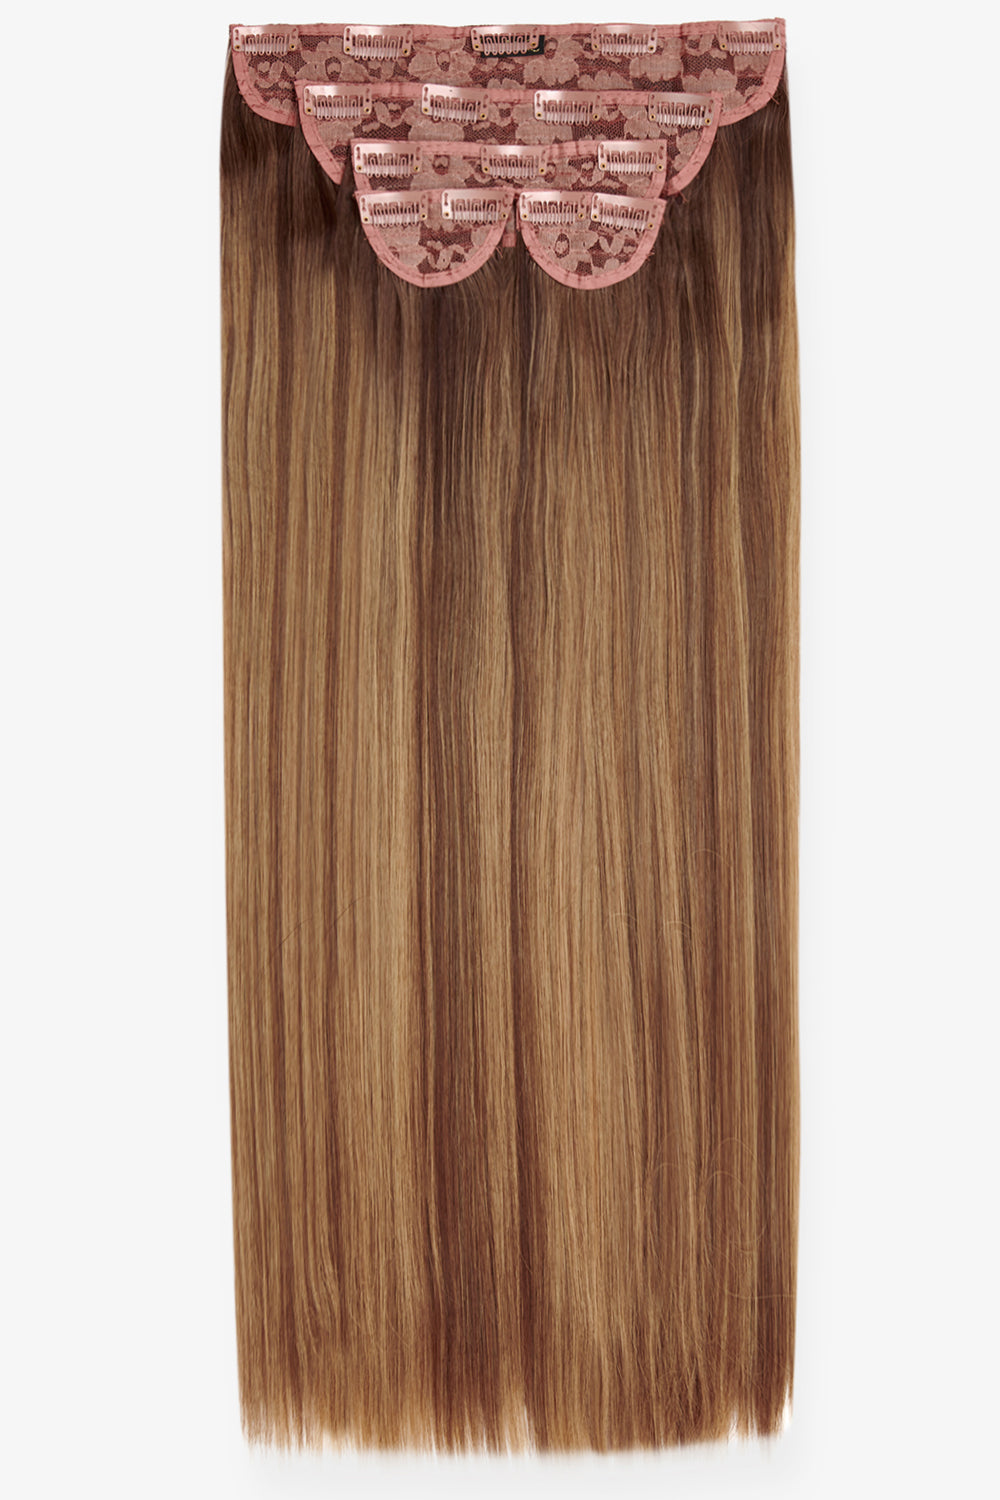 Super Thick 26" 5 Piece Straight Clip in Hair Extensions + Hair Care Bundle - Rooted Mellow Brown